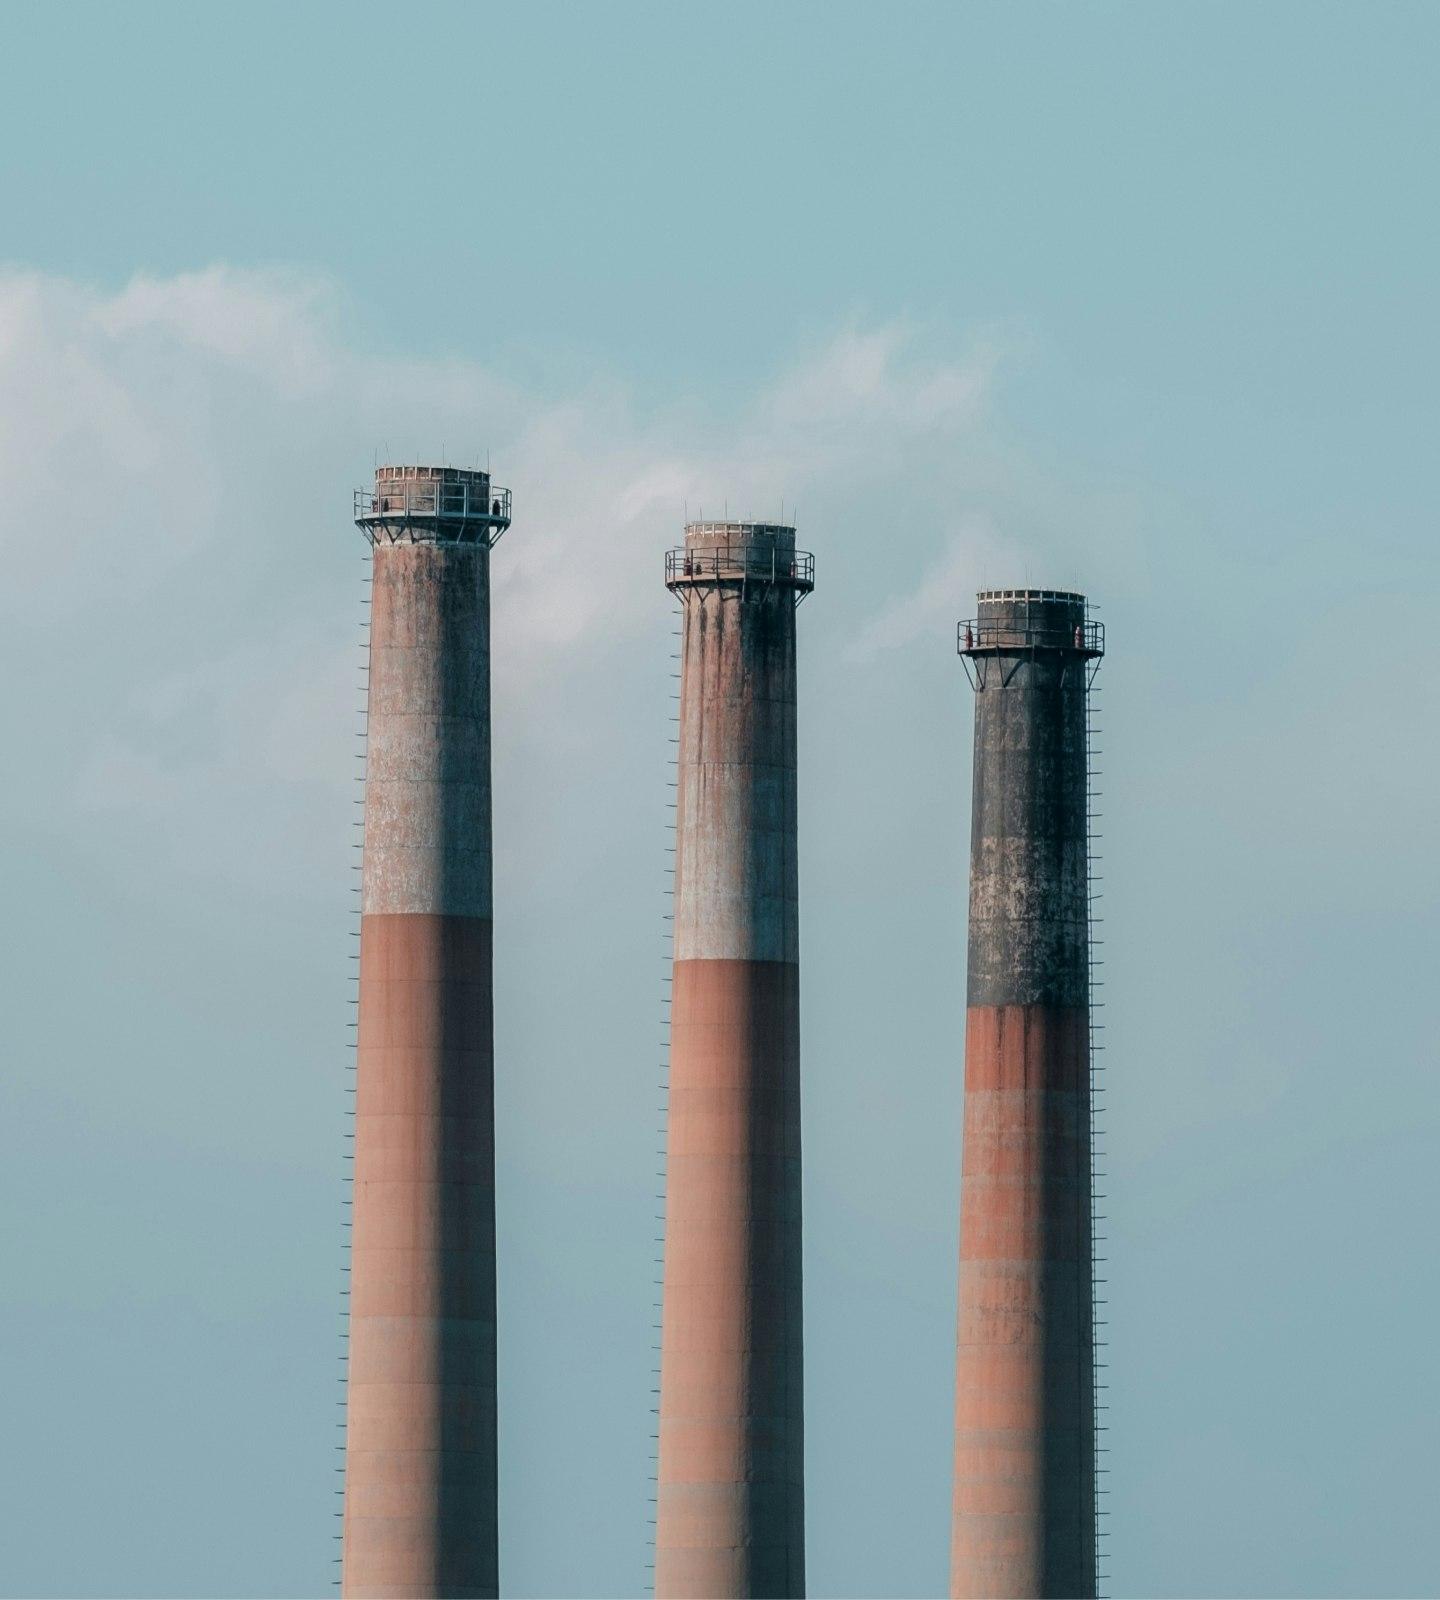 Three smoke stacks representing the need for clean energy